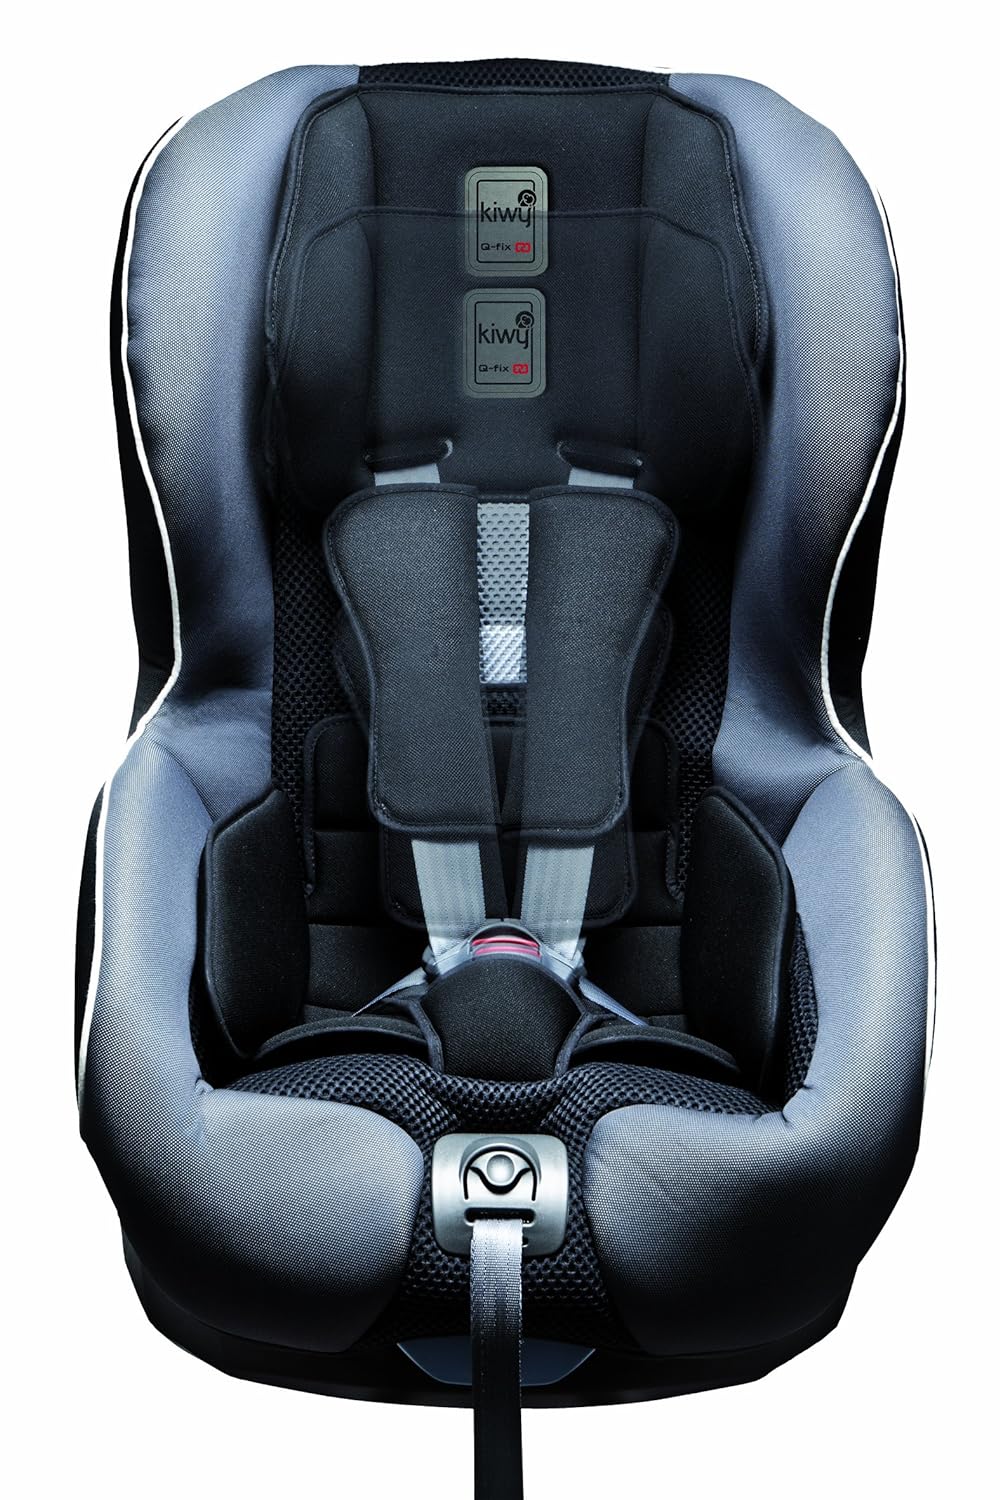 Kiwy 14011Kw02B Child Car Seat Gruppe1 1 With Isofix And Shock-Absorber-And